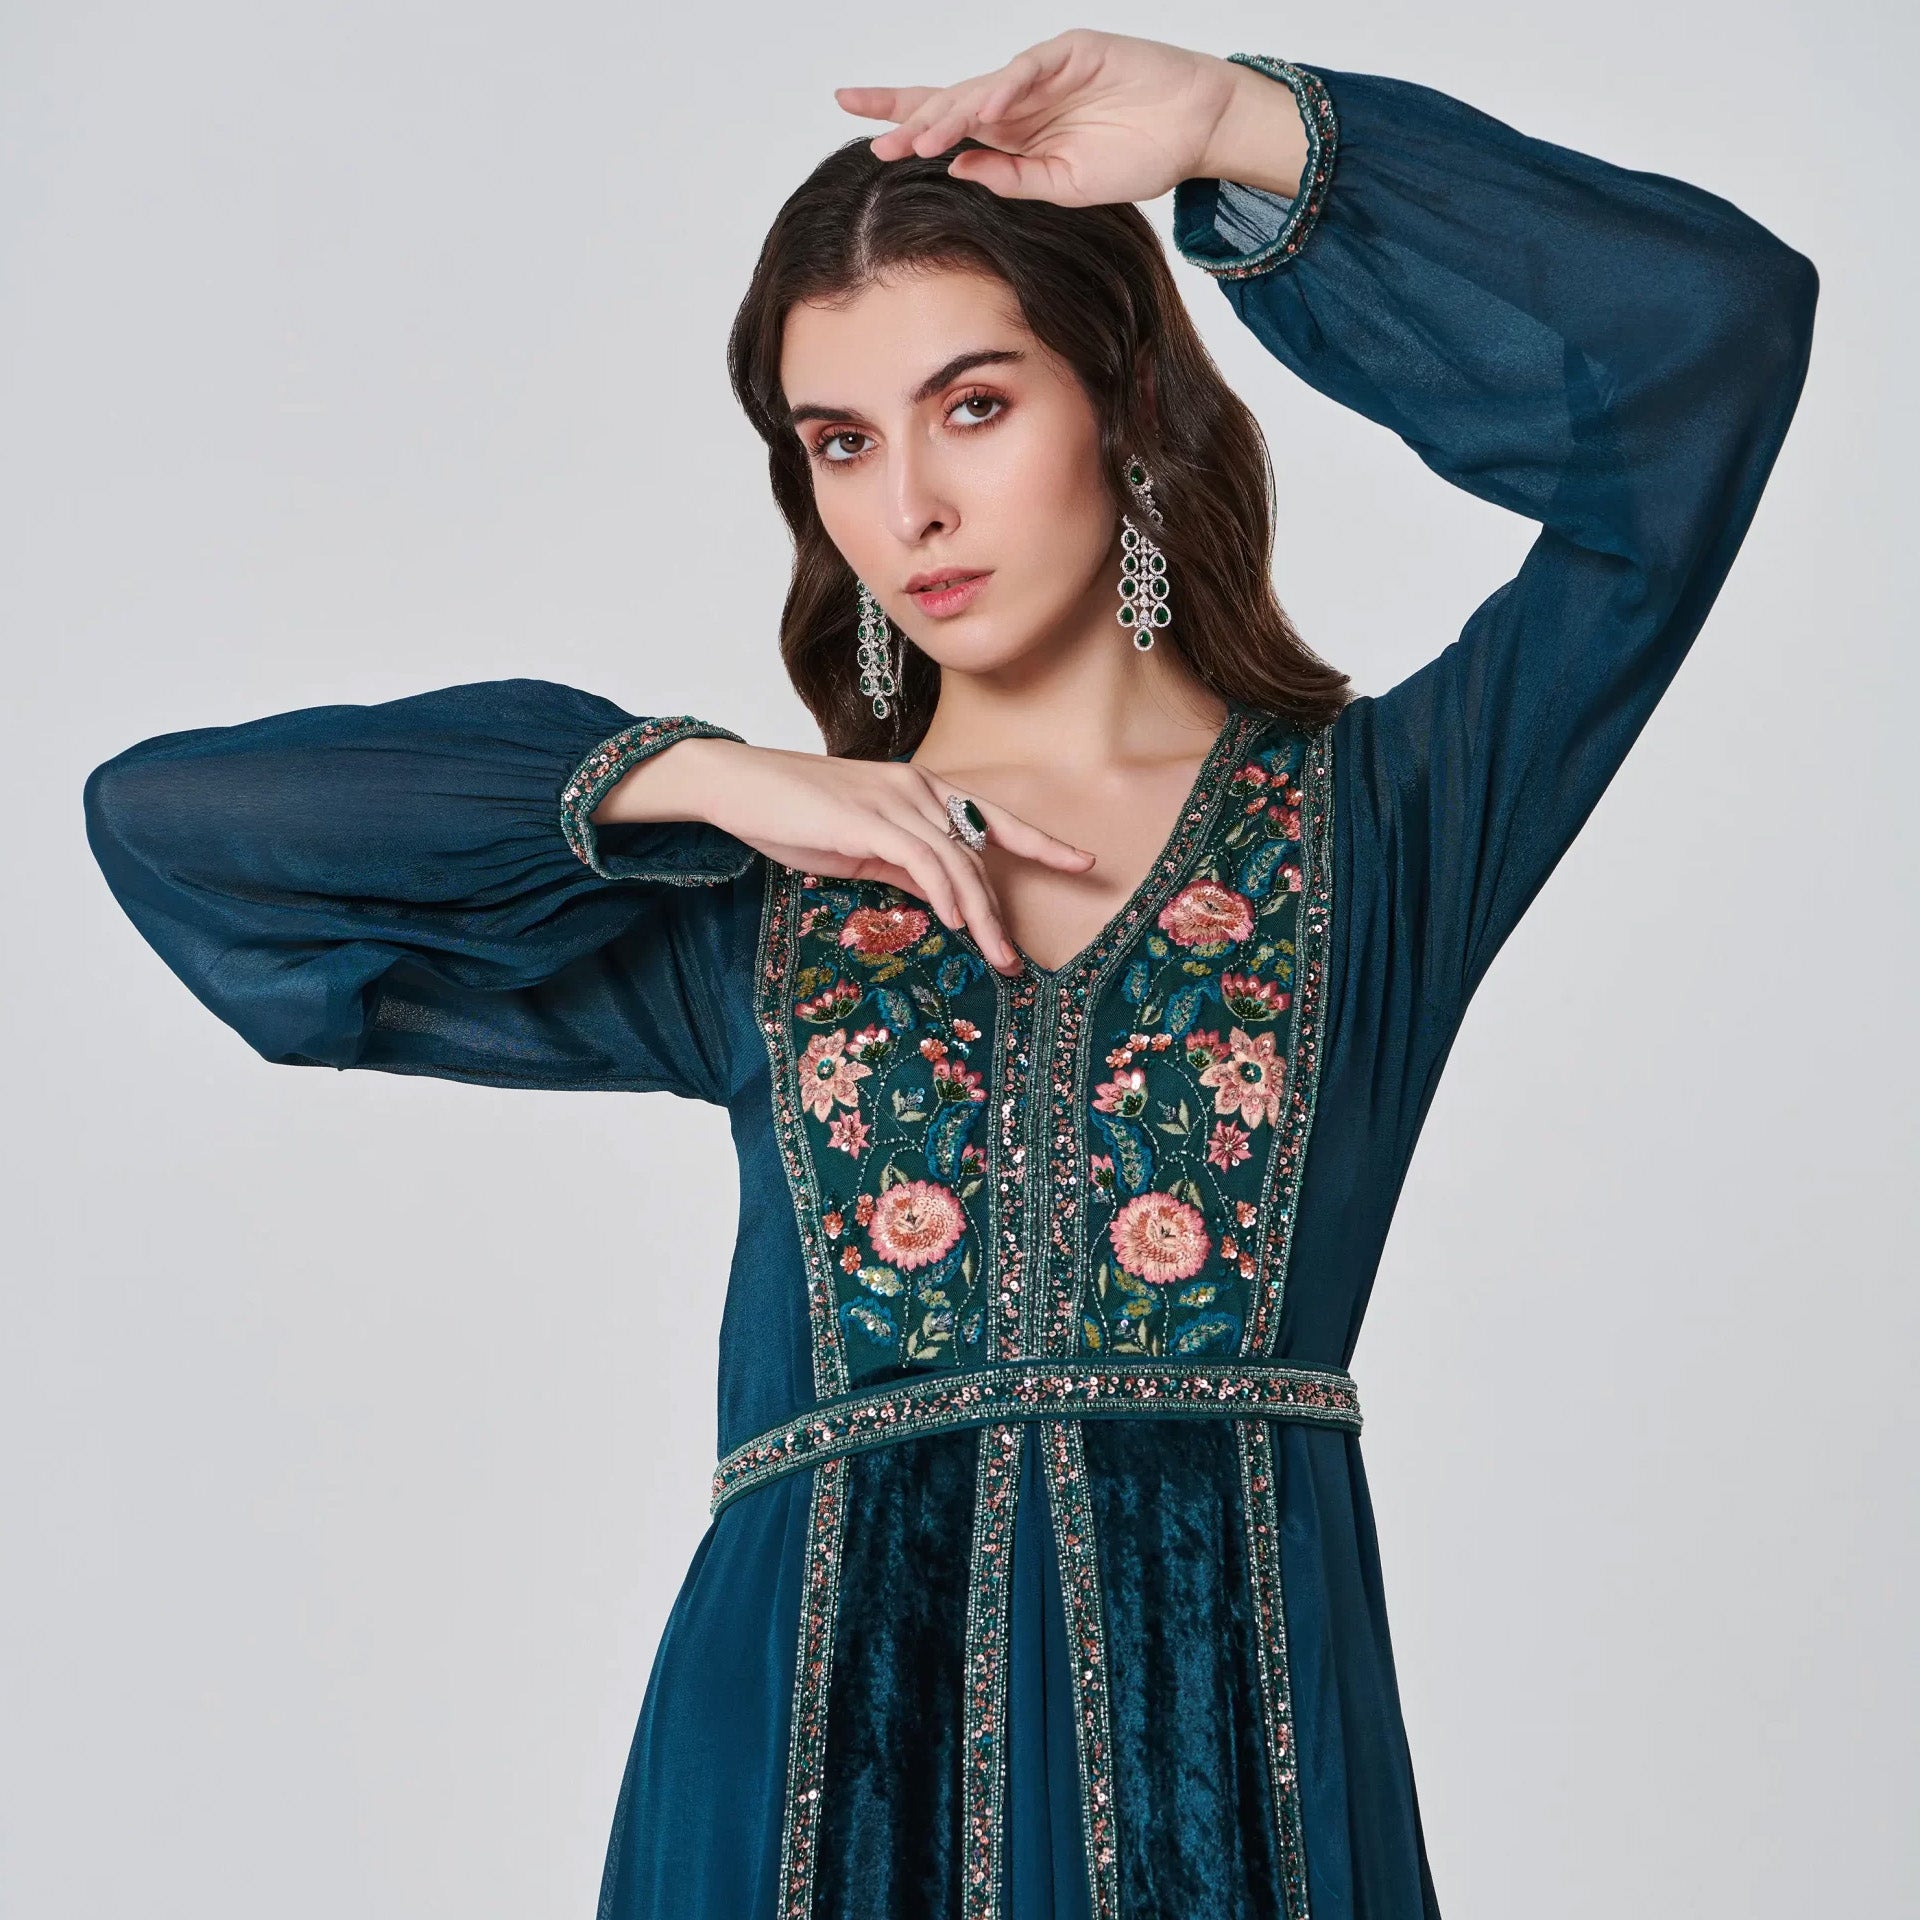 Petrol Crepe and Chiffon Embroidery Katrina Dress with Long Sleeves From Shalky